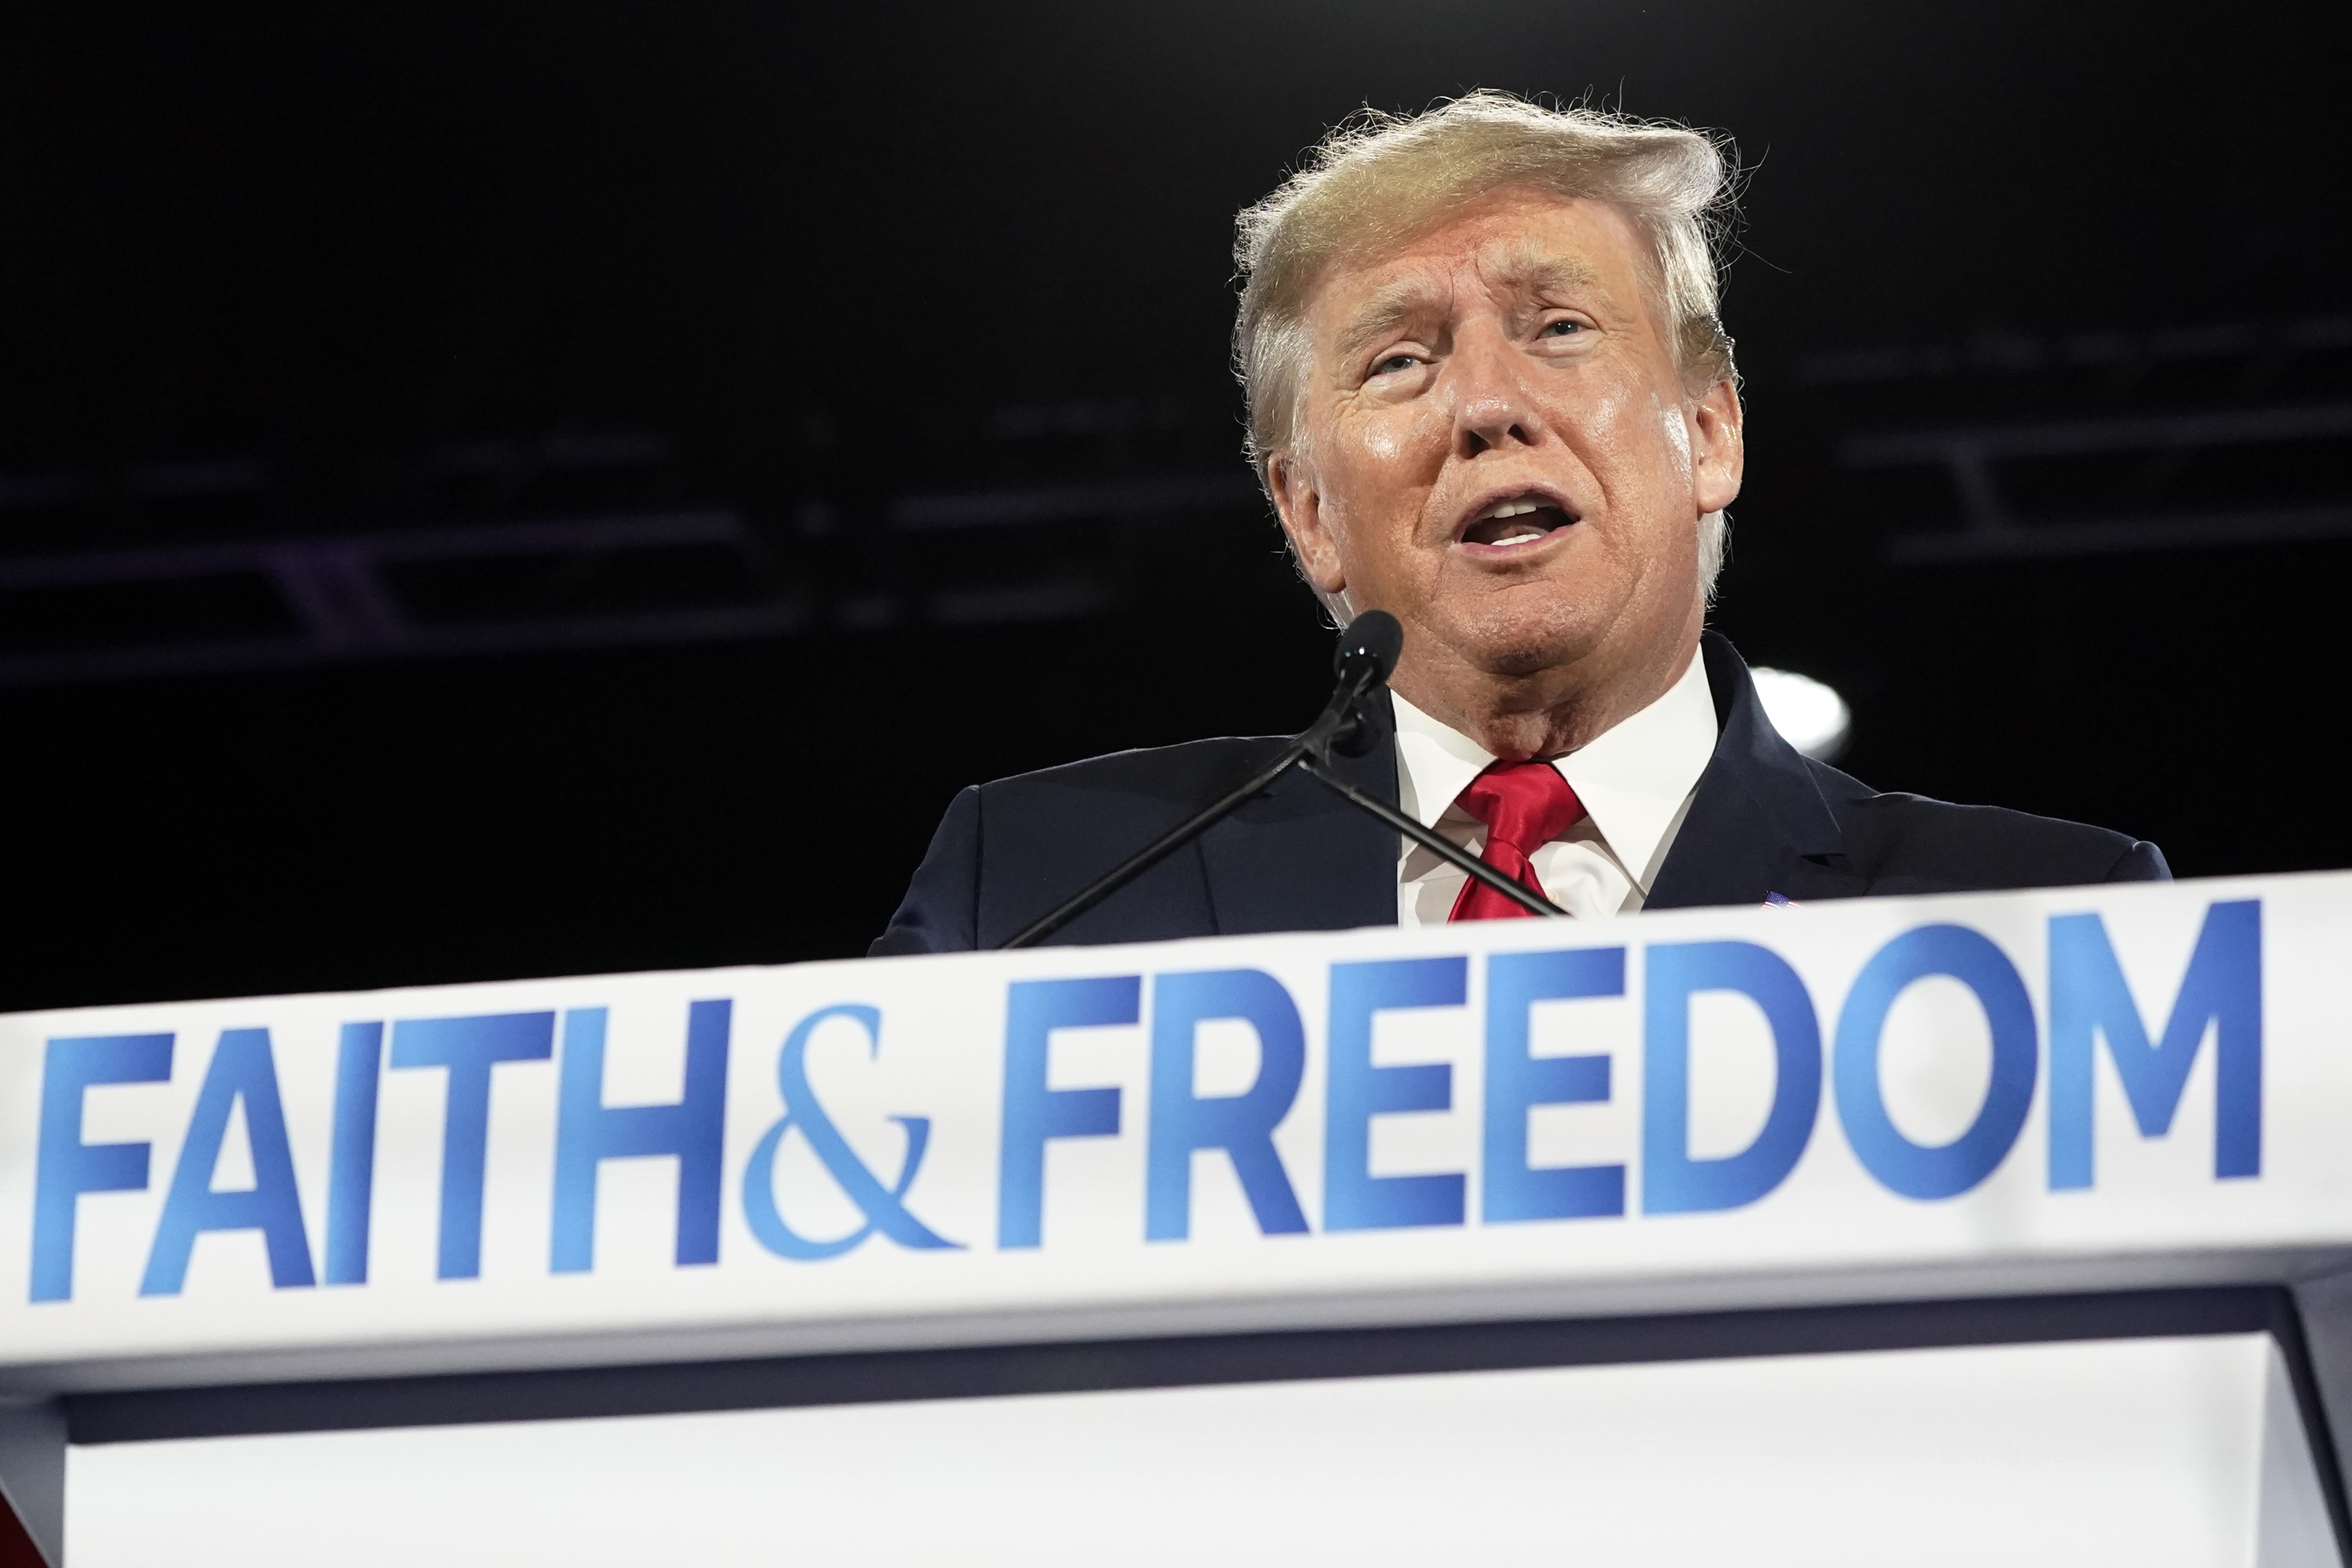 Former President Donald Trump speaks at the Road to Majority conference Friday, June 17, 2022, in Nashville, Tenn. (AP Photo/Mark Humphrey)